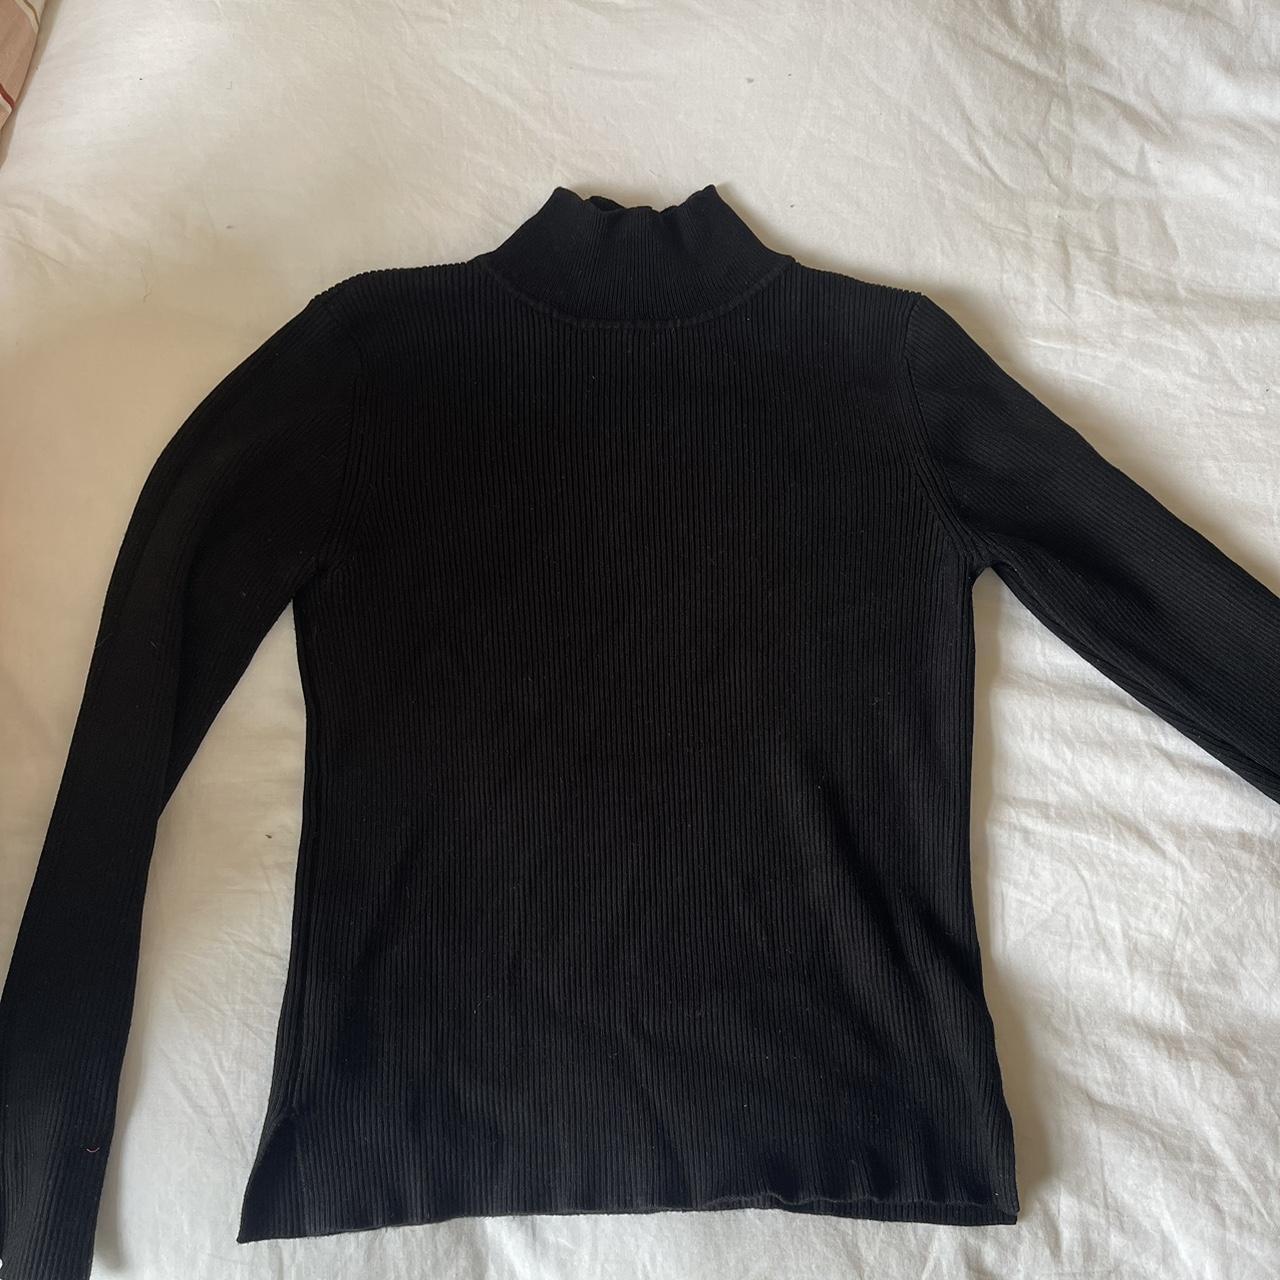 The best black Turtle neck!! From Woolworths (South... - Depop